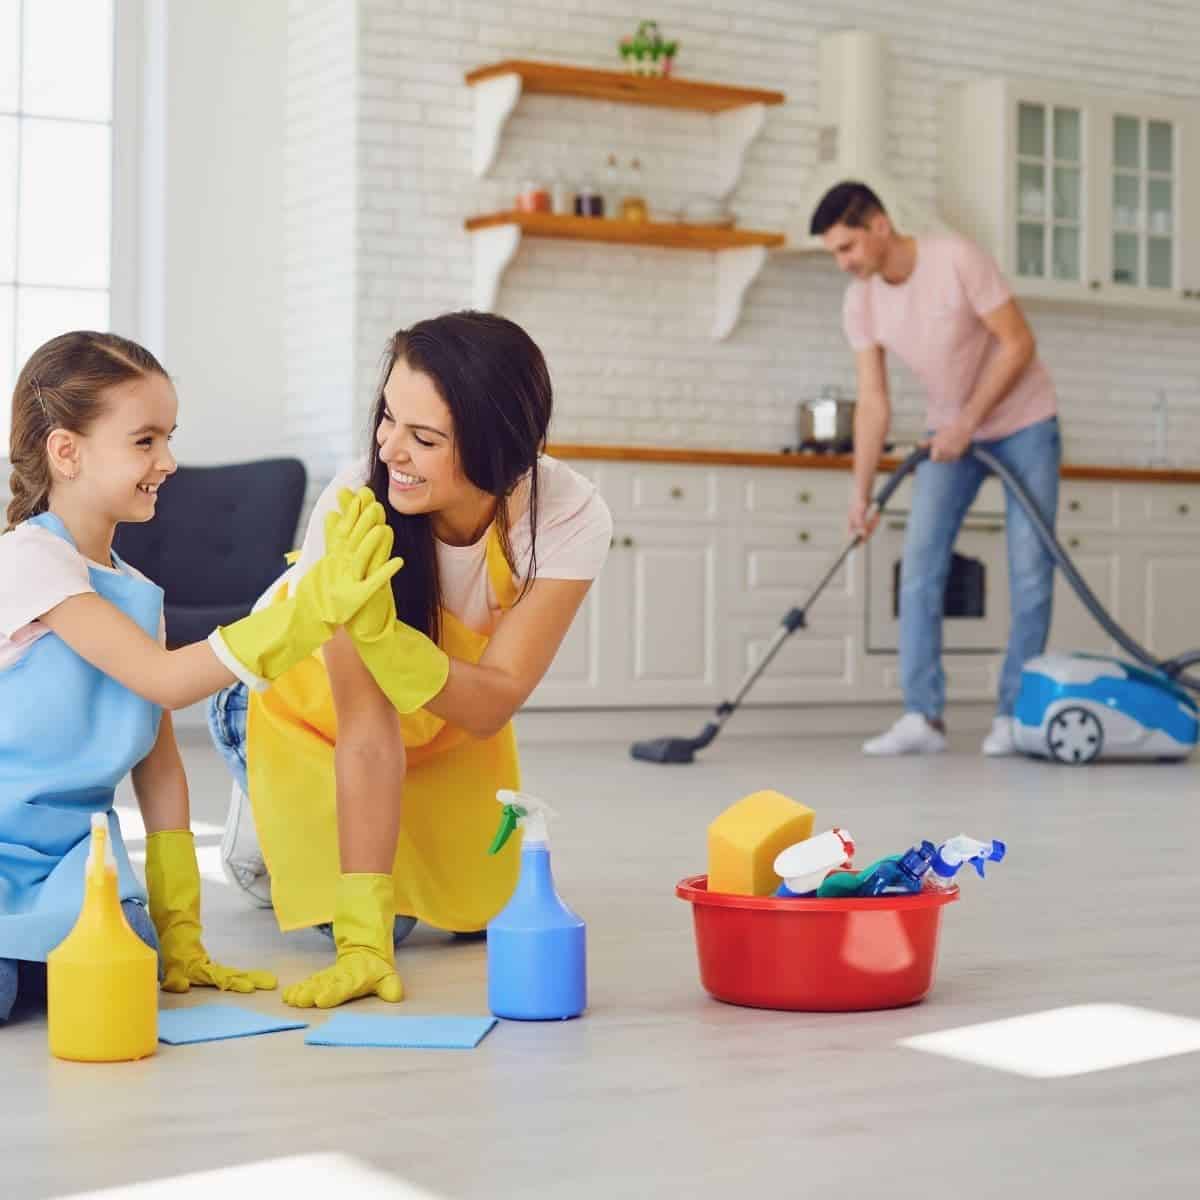 https://simplifylivelove.com/wp-content/uploads/2022/04/family-speed-cleaning-tips-1.jpg